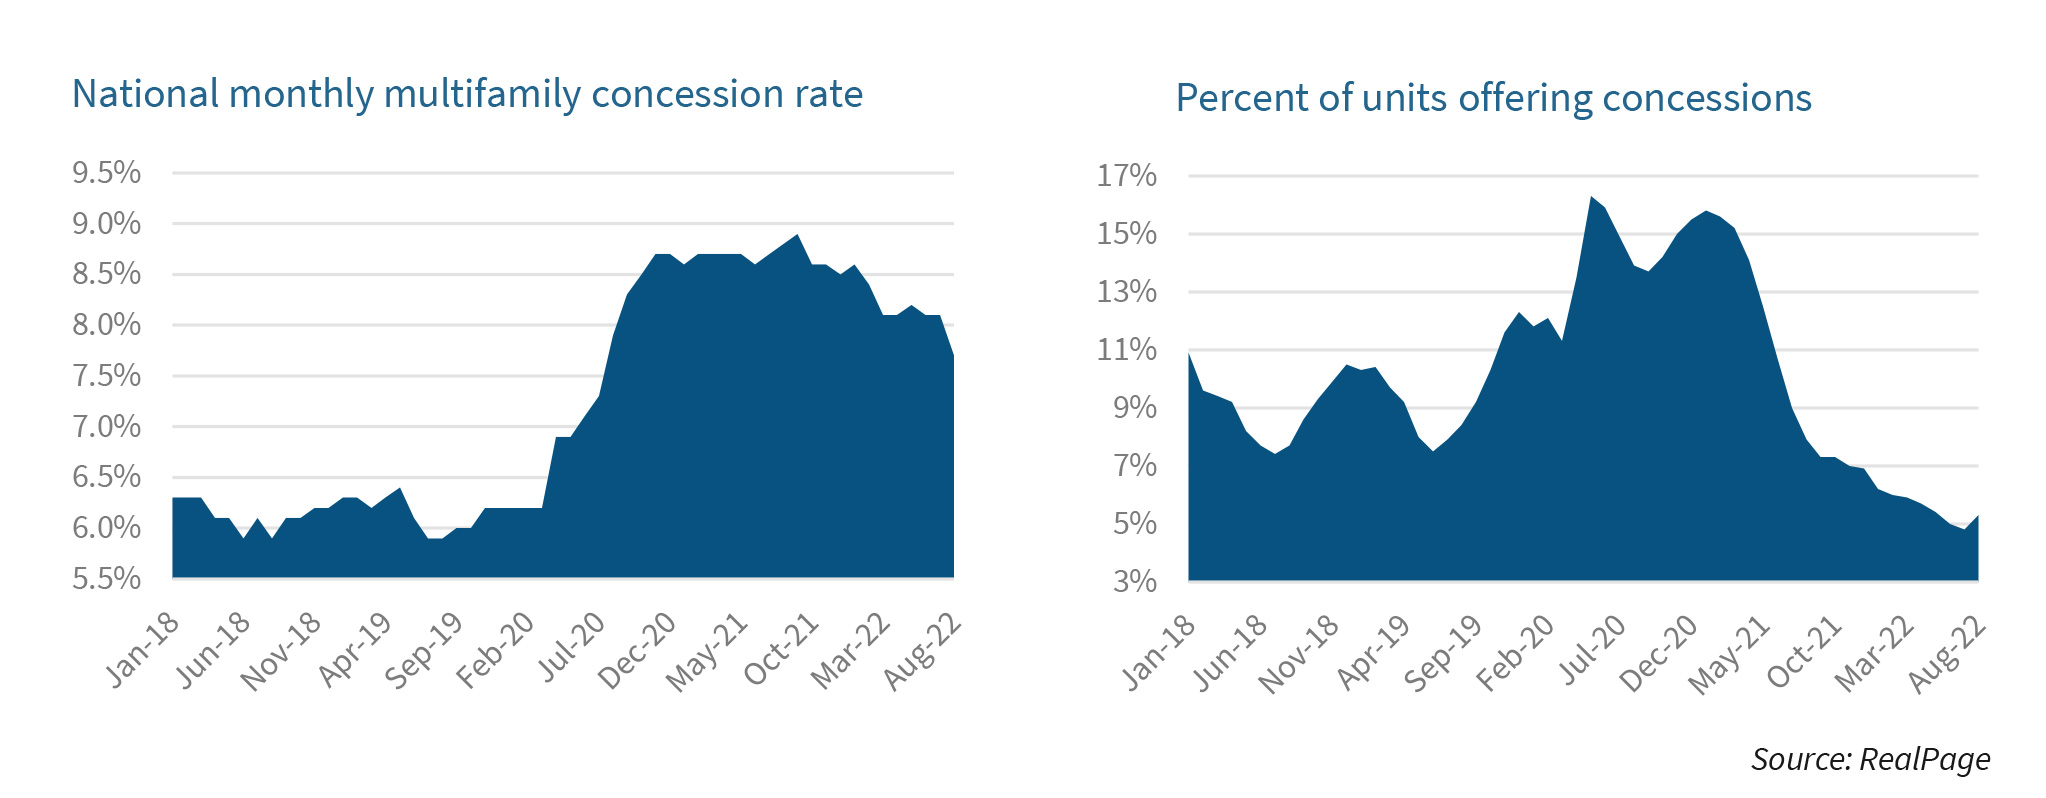 Graphs - National monthly multifamily concession rate & Percent of units offering concessions